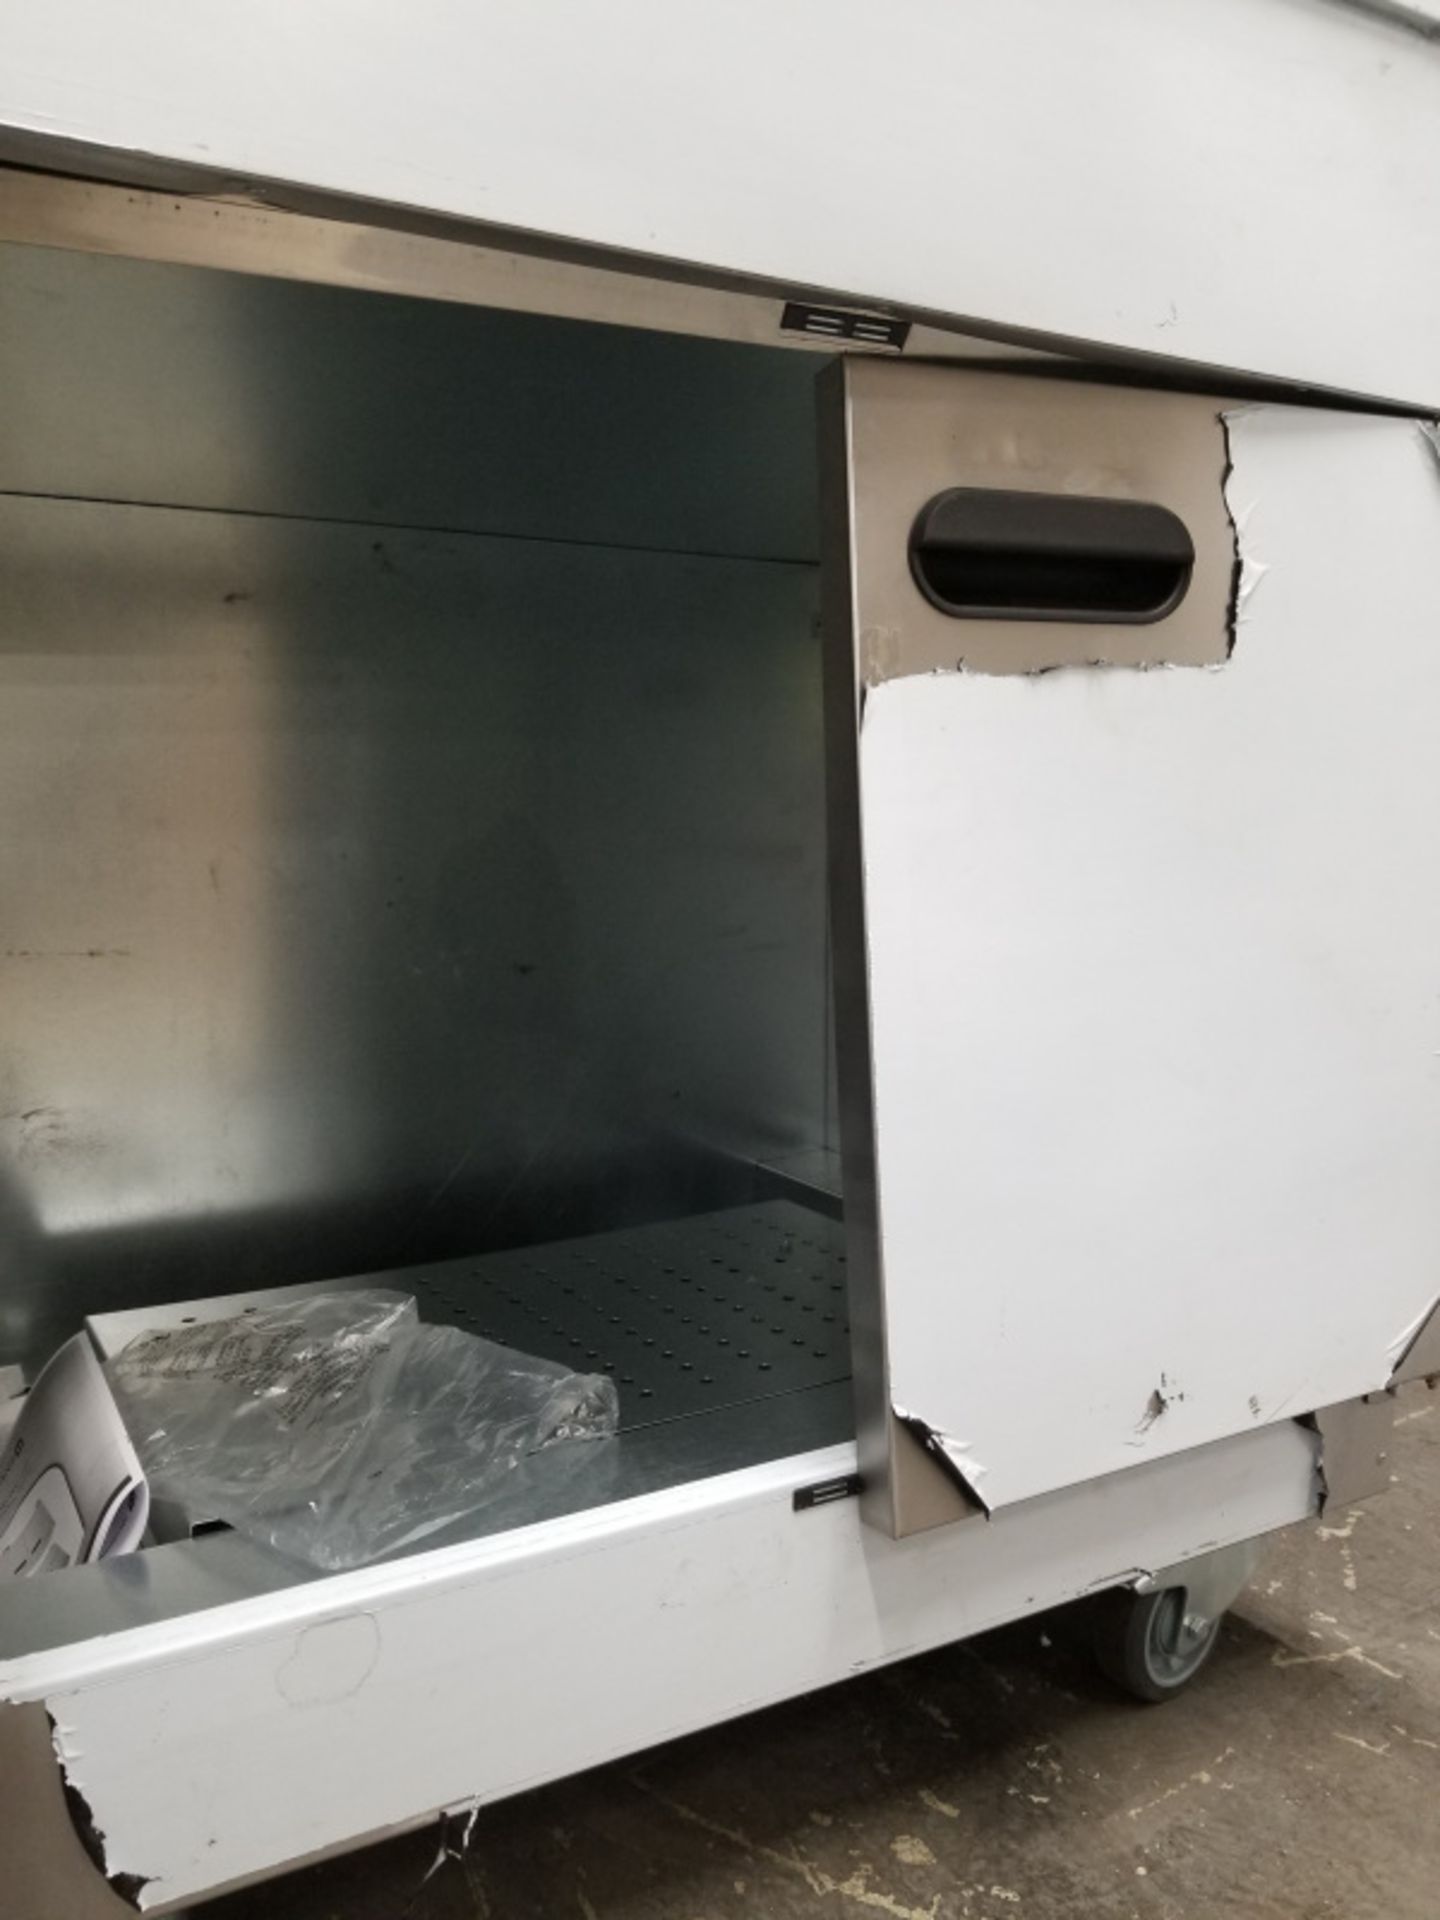 Parry Mobile Servery - Model 1887 Serial No.170030920 - L870 x W620 x H940mm - Right hand - Image 3 of 10